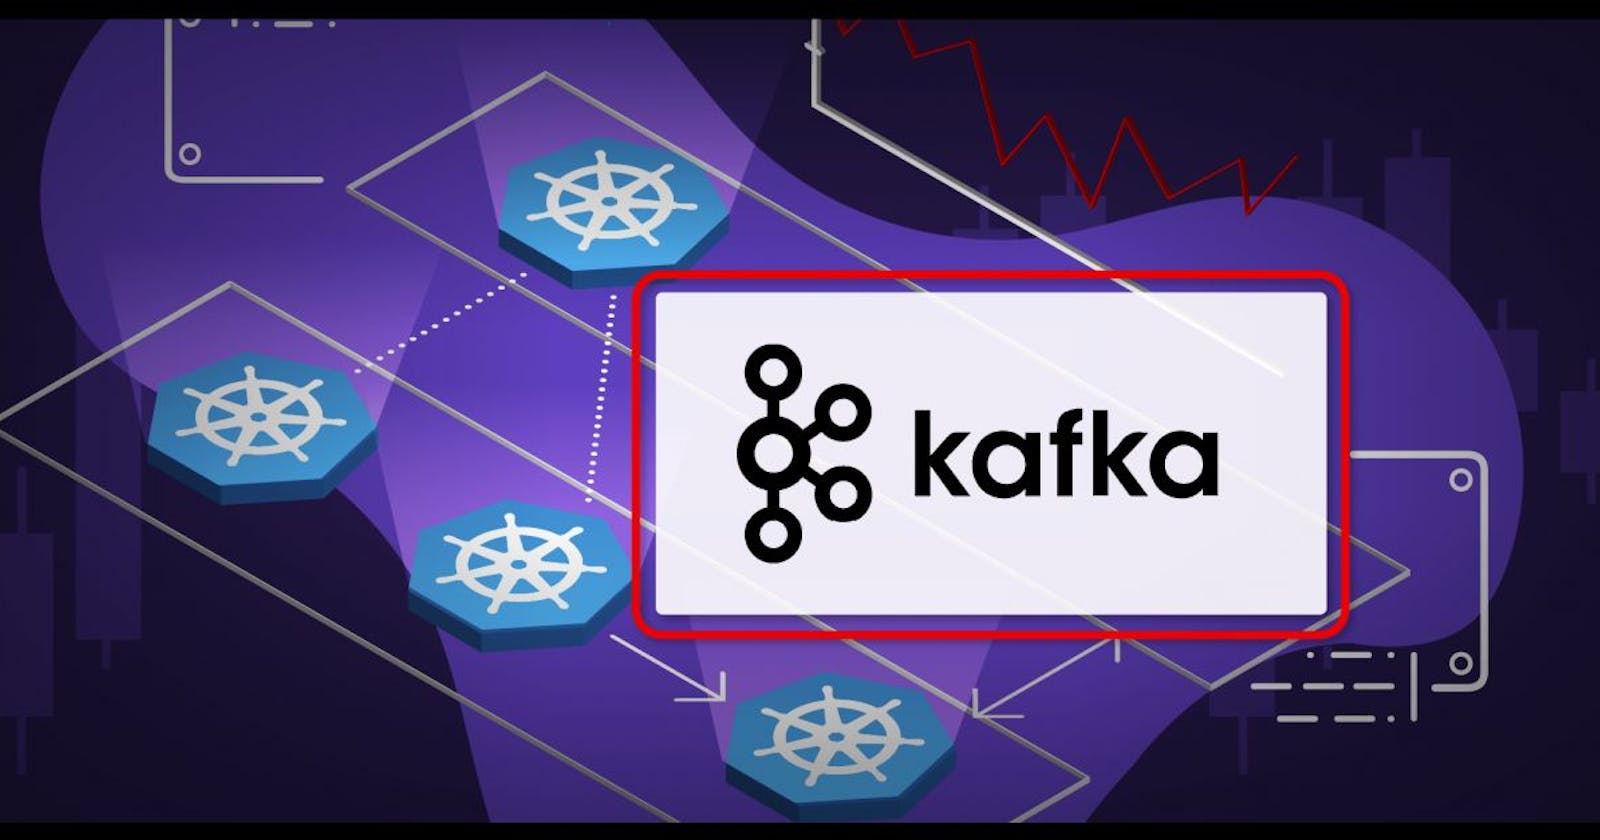 Deploying a scalable Kafka Architecture with an Sql database on Kubernetes Cluster